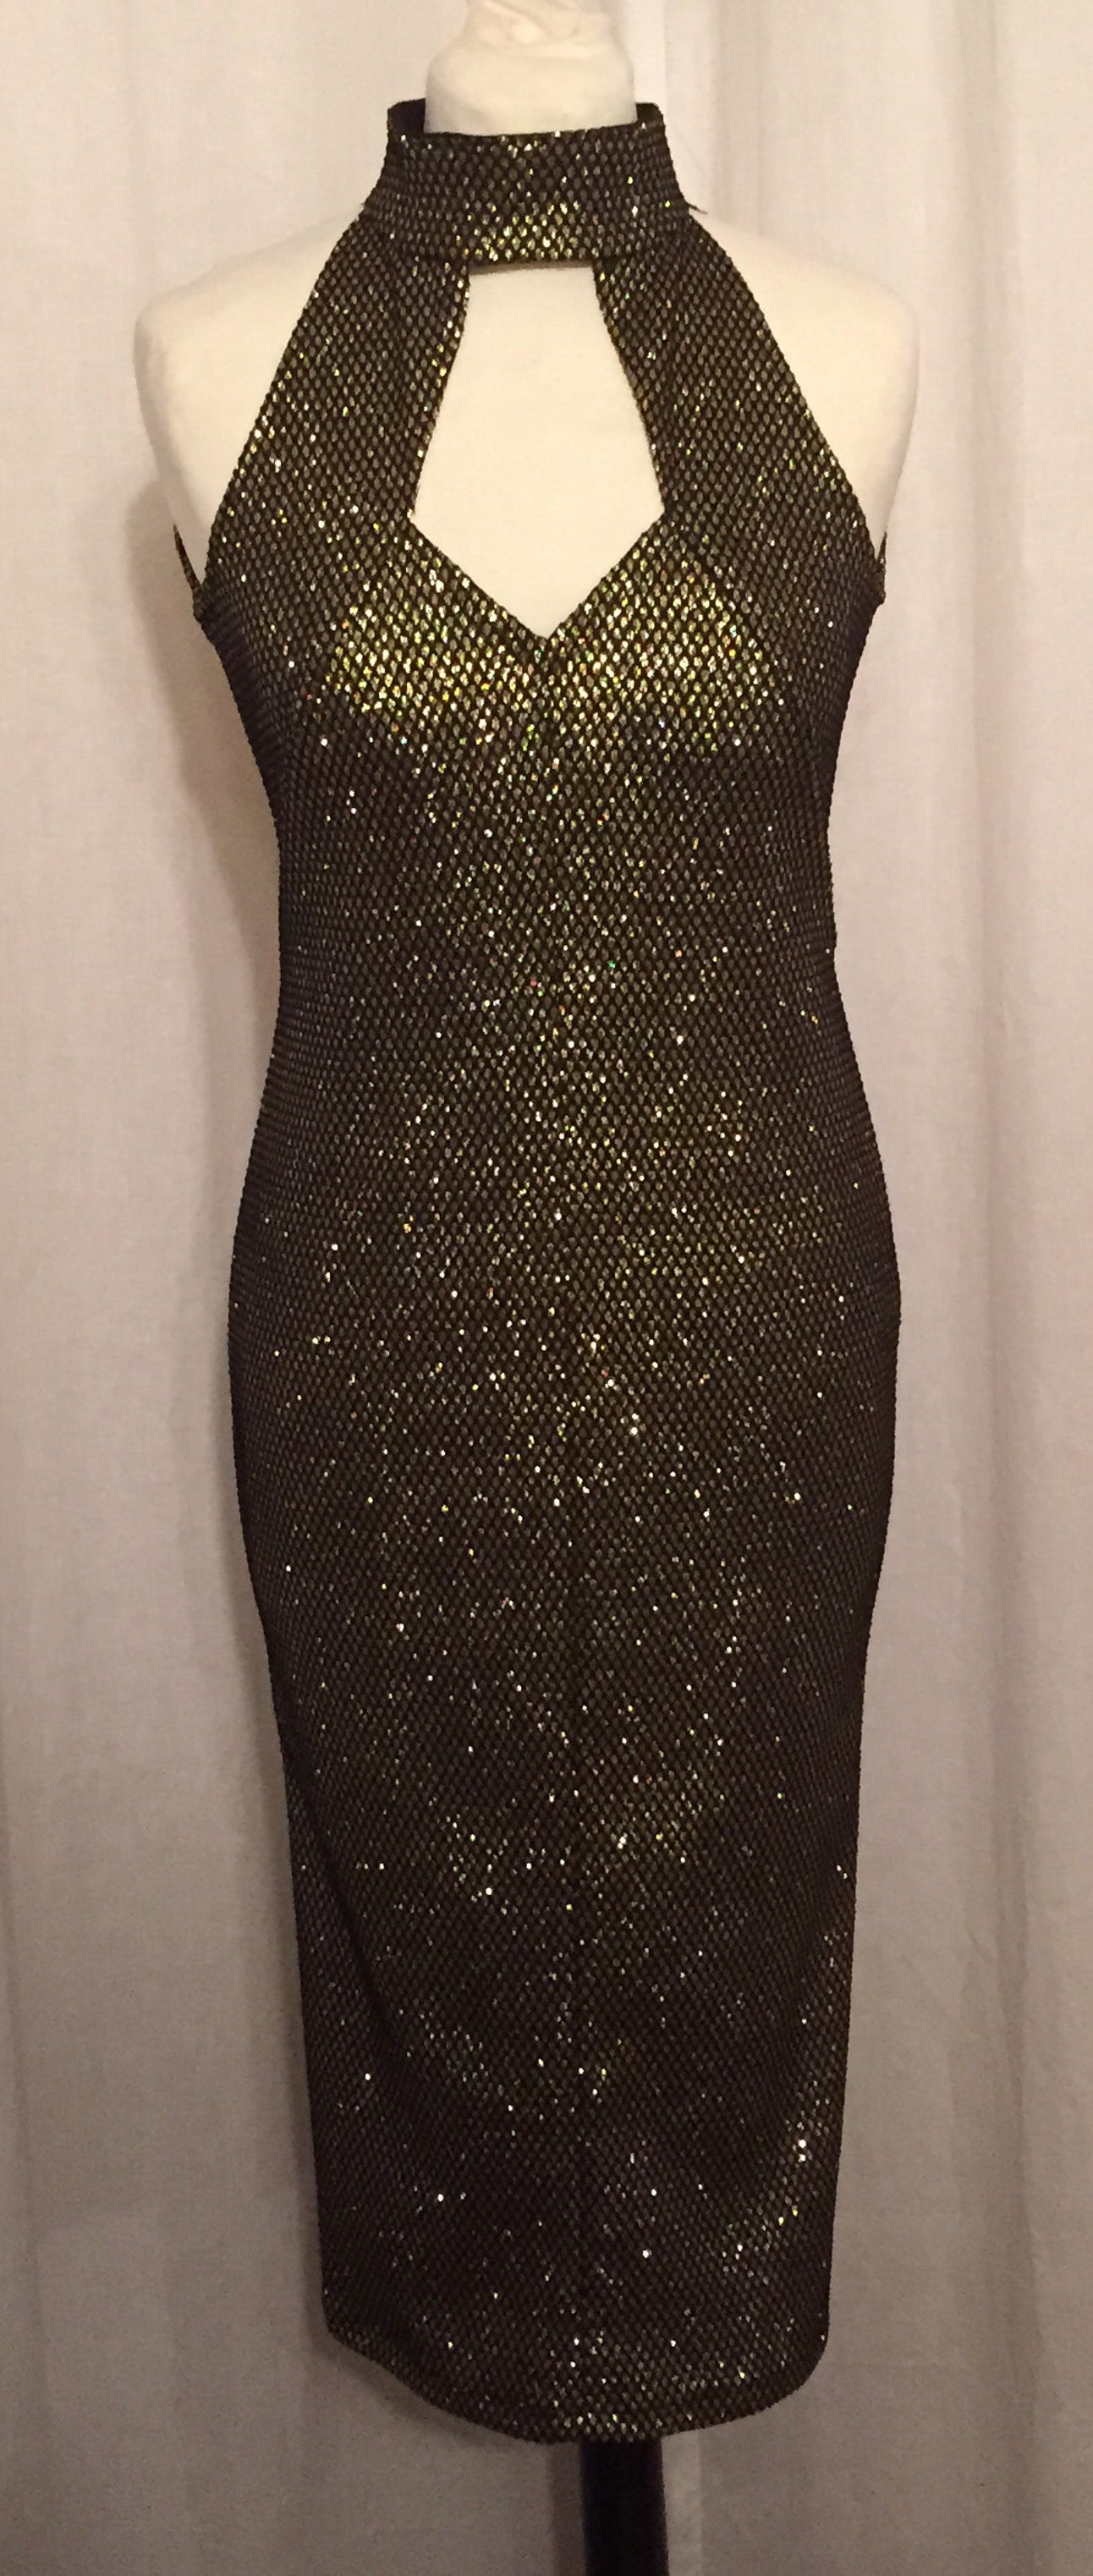 Vintage 1950s style gold lurex and black net backless wiggle dress M XL only